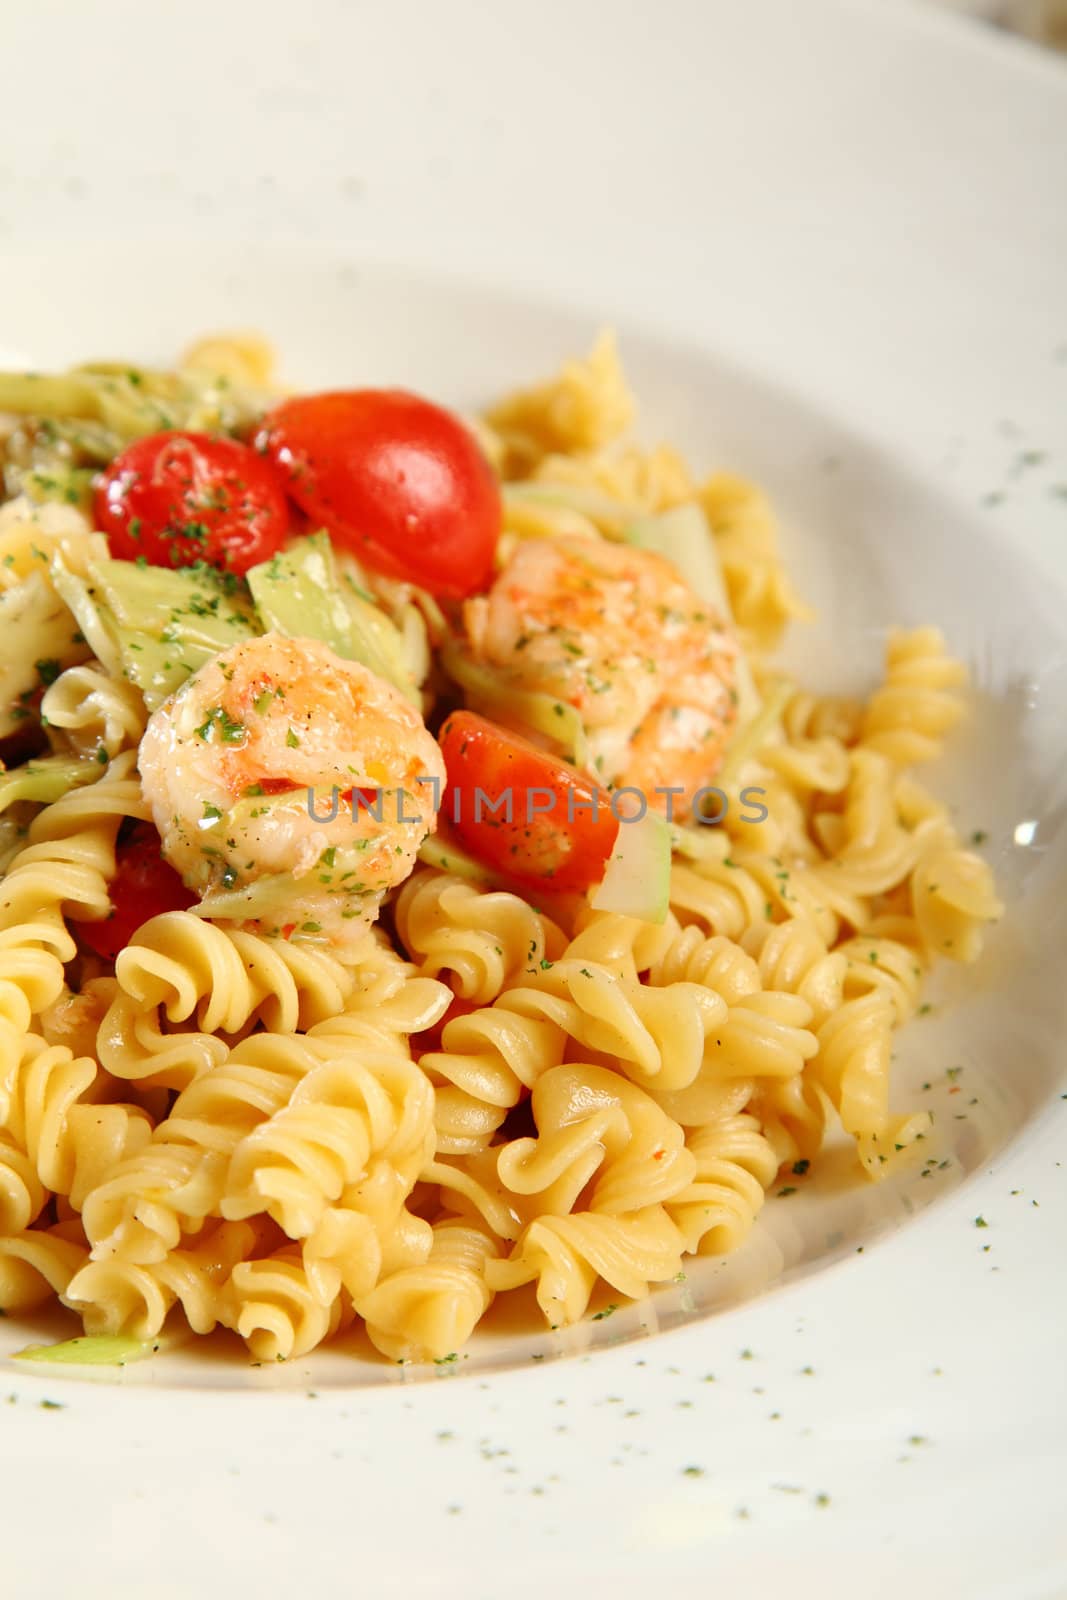 fresh pasta fusilli with shrimps and tomatoes